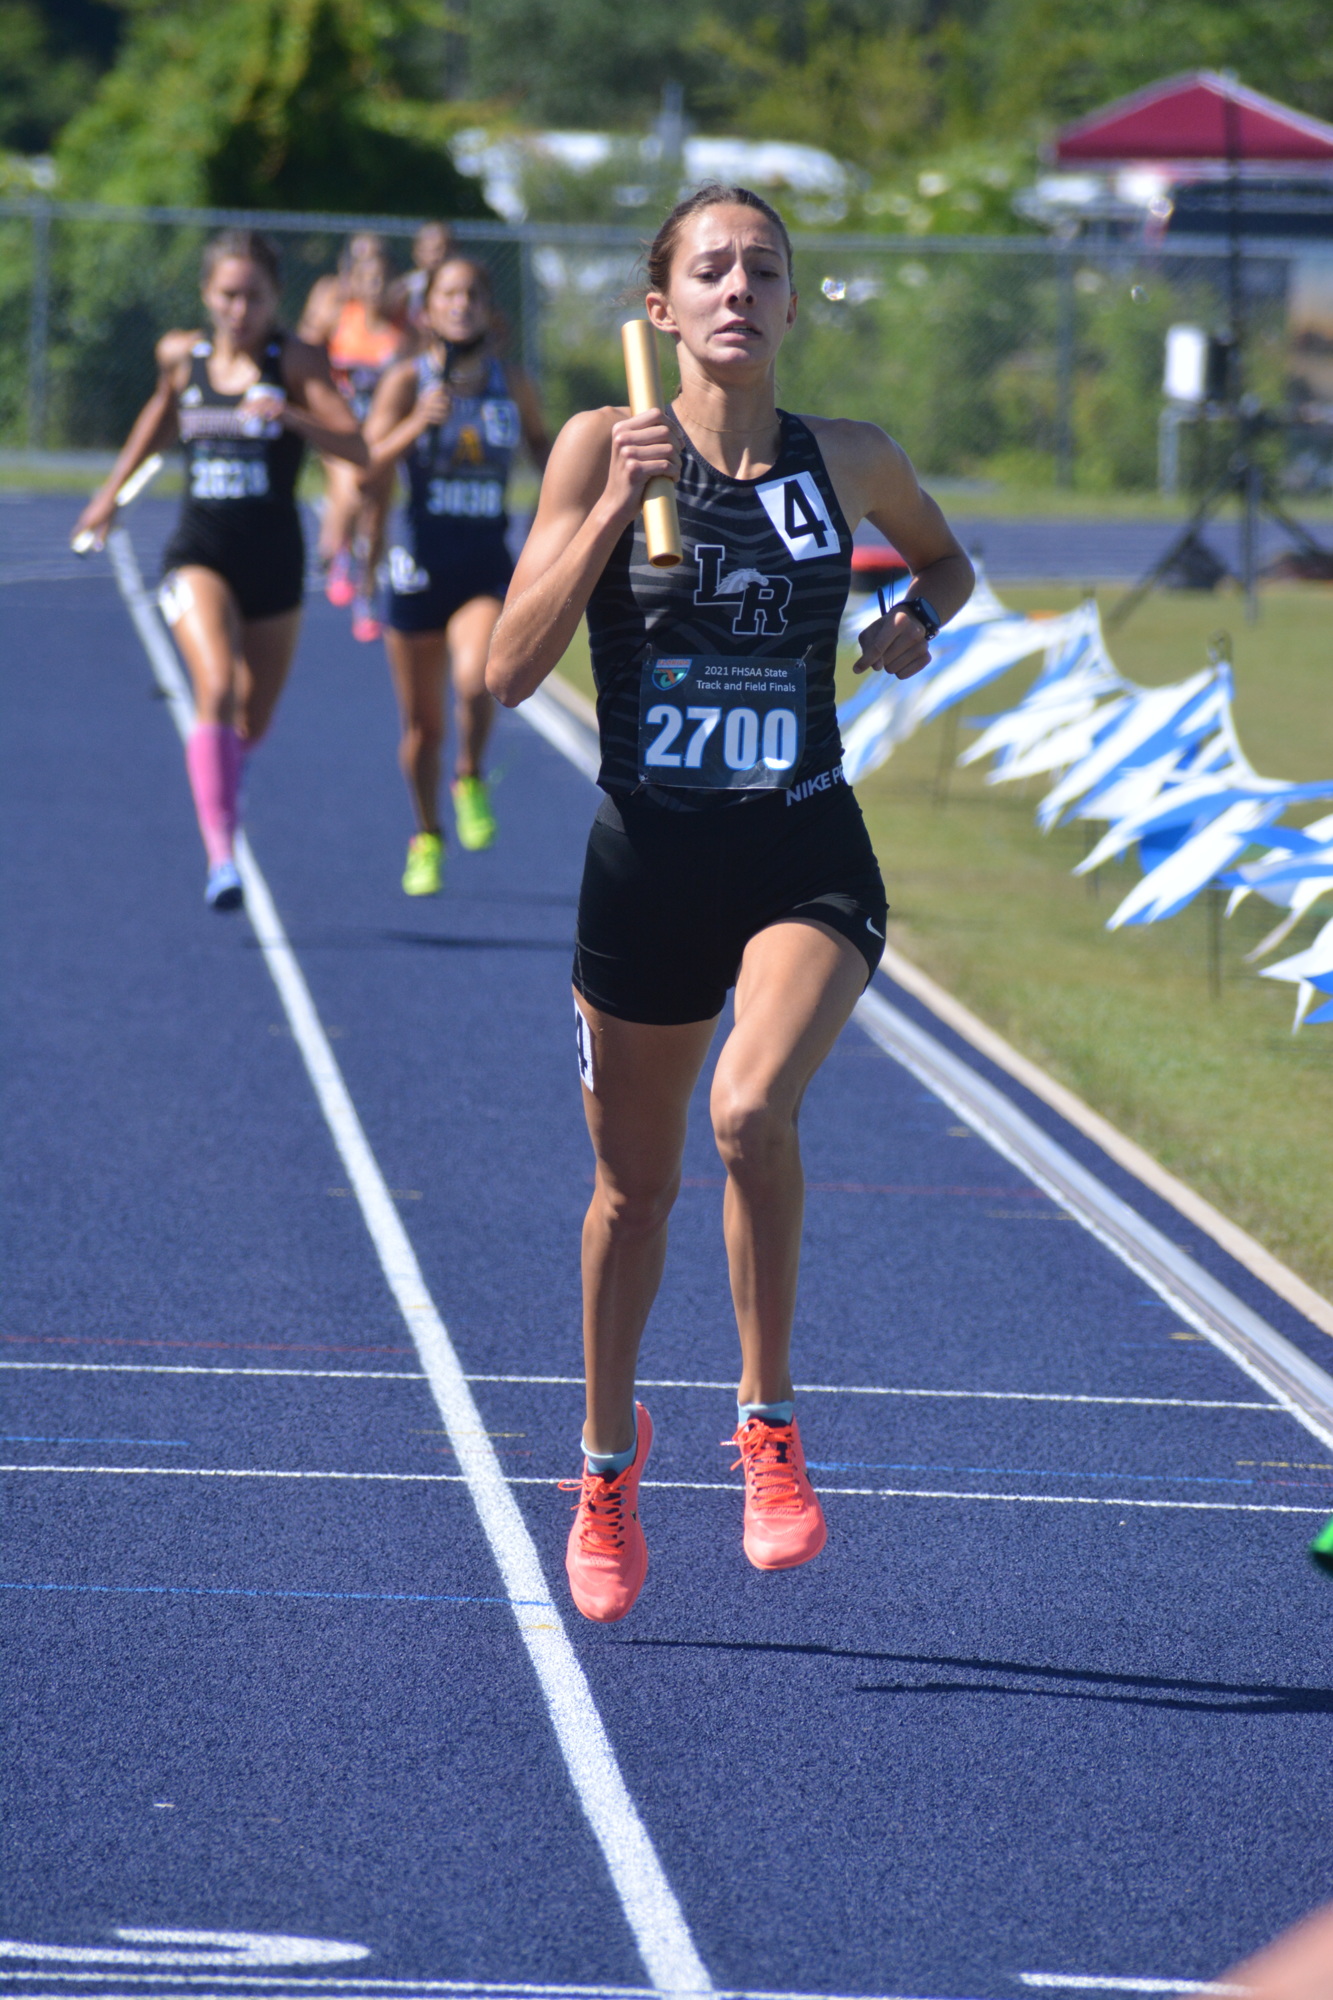 5. Lakewood Ranch senior Grace Marston will be shooting for an individual medal at the 2022 track and field state championships.